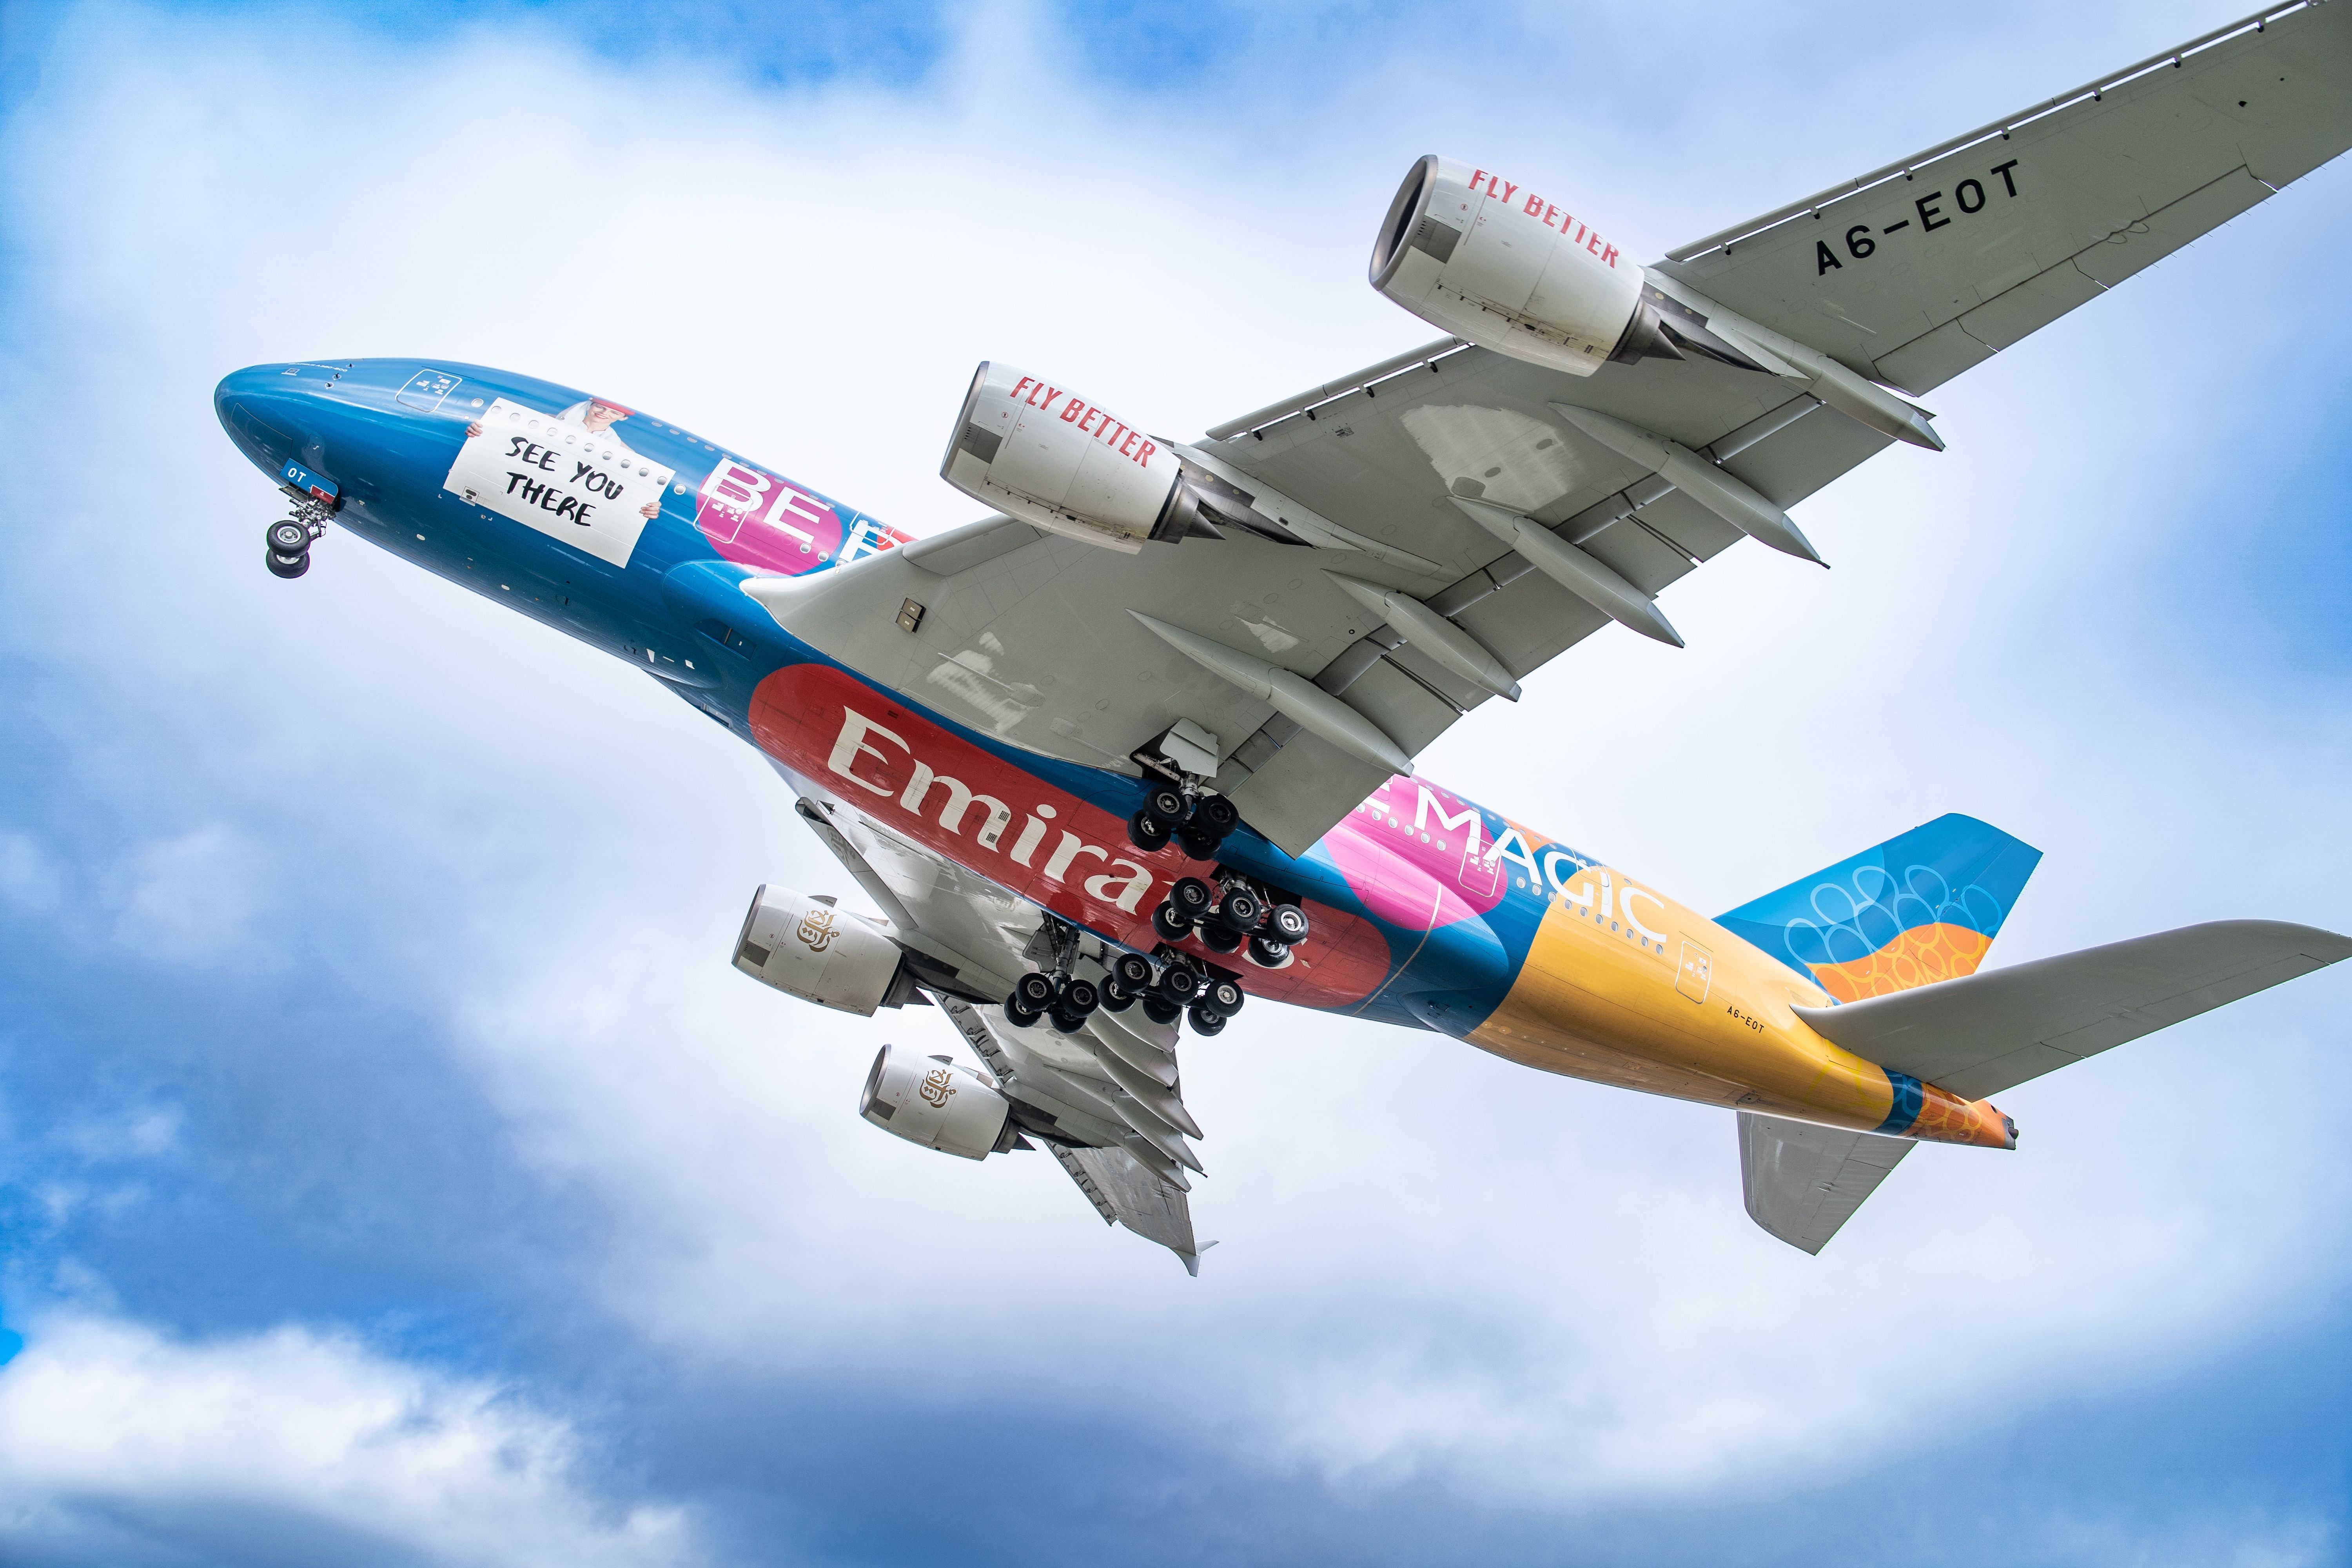 Emirates Airbus A380 EXPO 2020 Blue livery